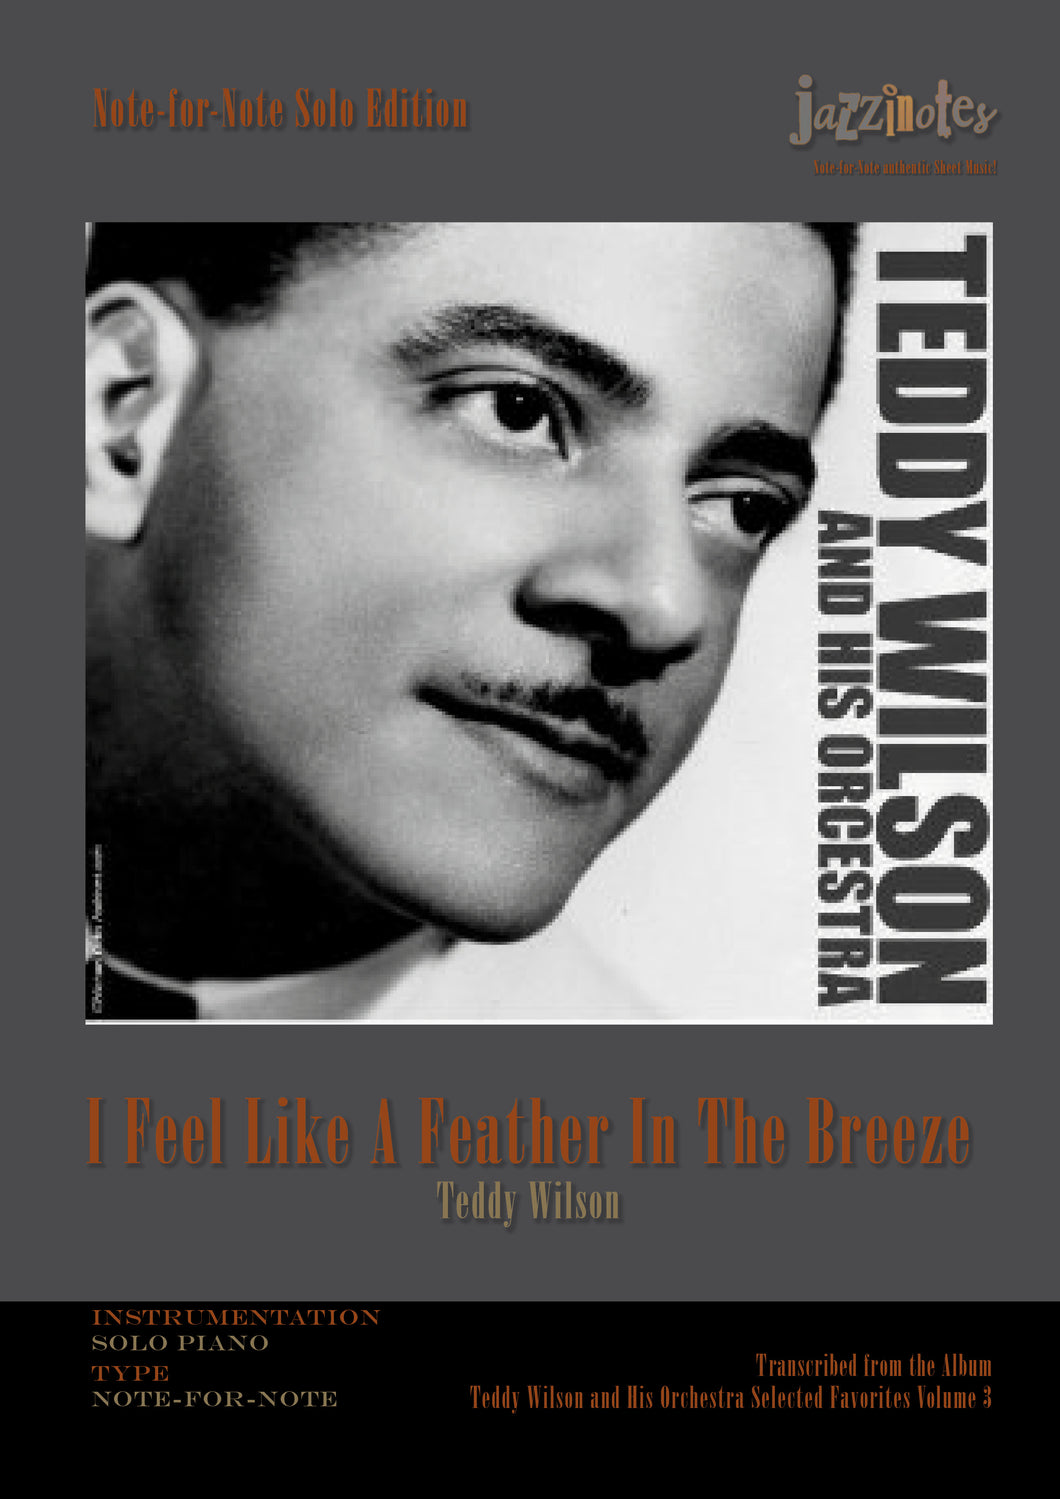 Wilson, Teddy: I Feel Like A Feather In The Breeze - Sheet Music Download